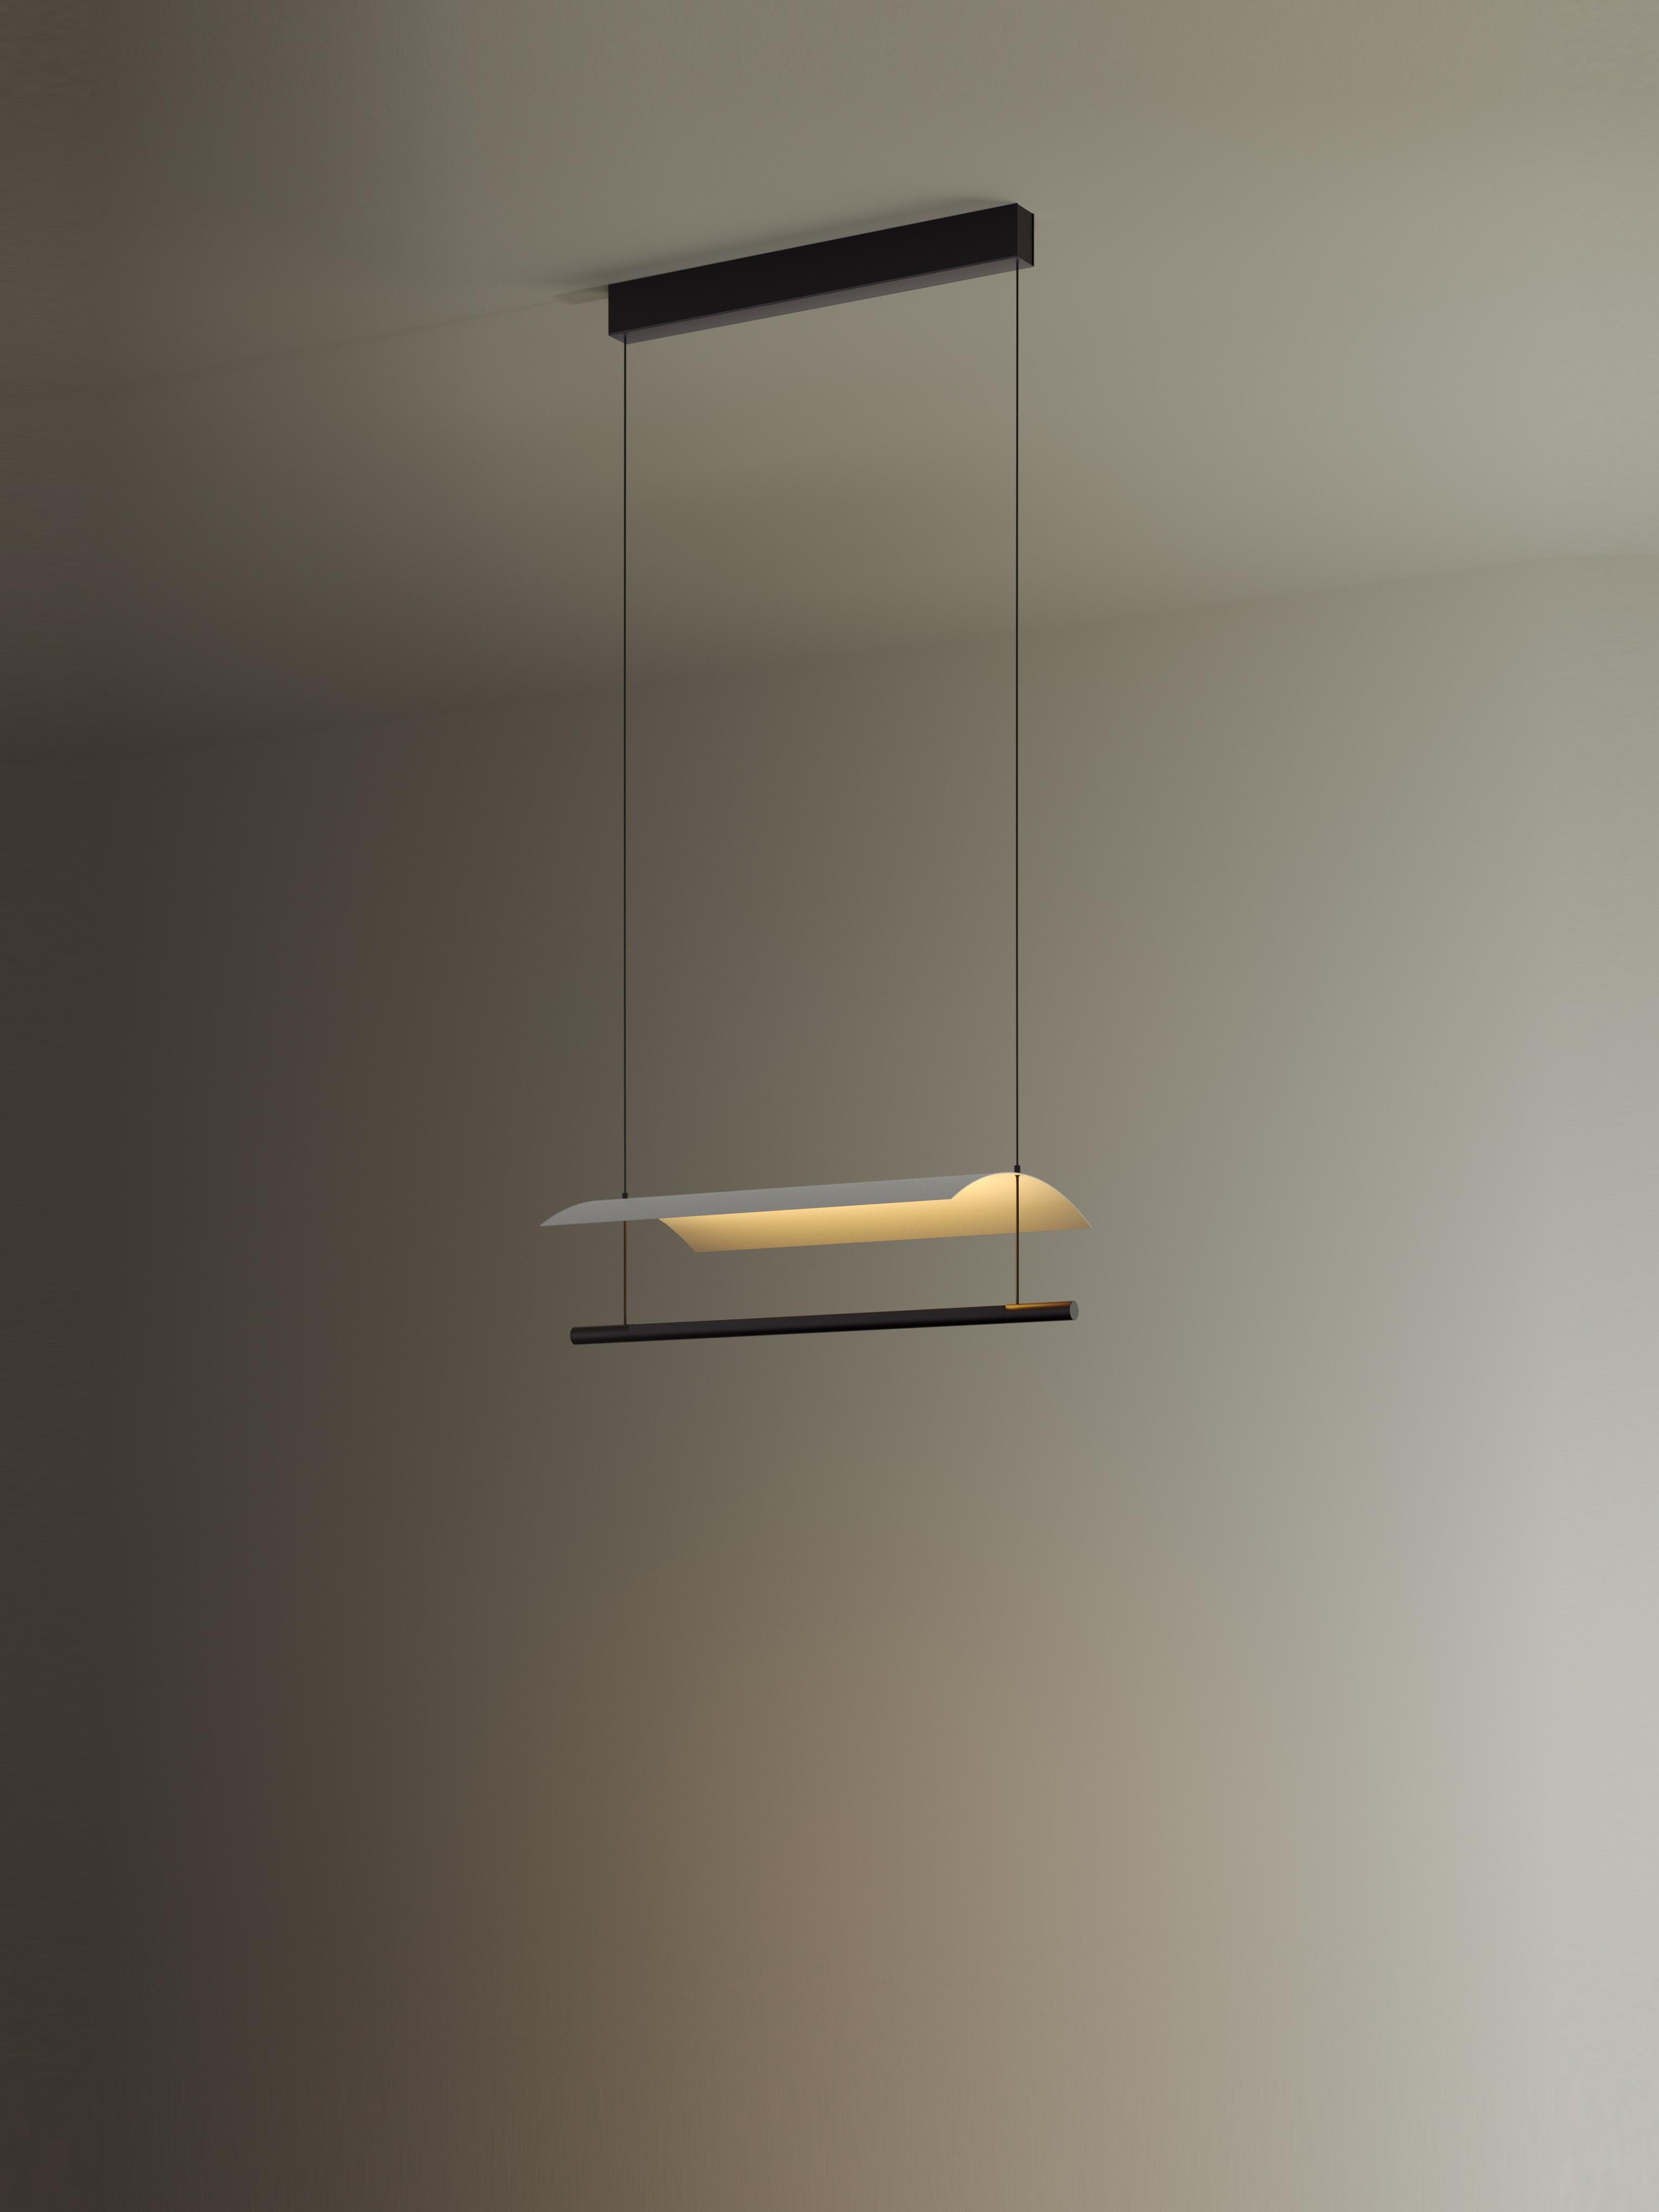 Lámina 45 pendant lamp by Antoni Arola
Dimensions: D 58.7 x W 30 x H 12.6 cm
Materials: Metal, plastic.
Available in other sizes.

A line of light and a thin metal sheet create a soft but effective levity. A marriage of the poetic and the